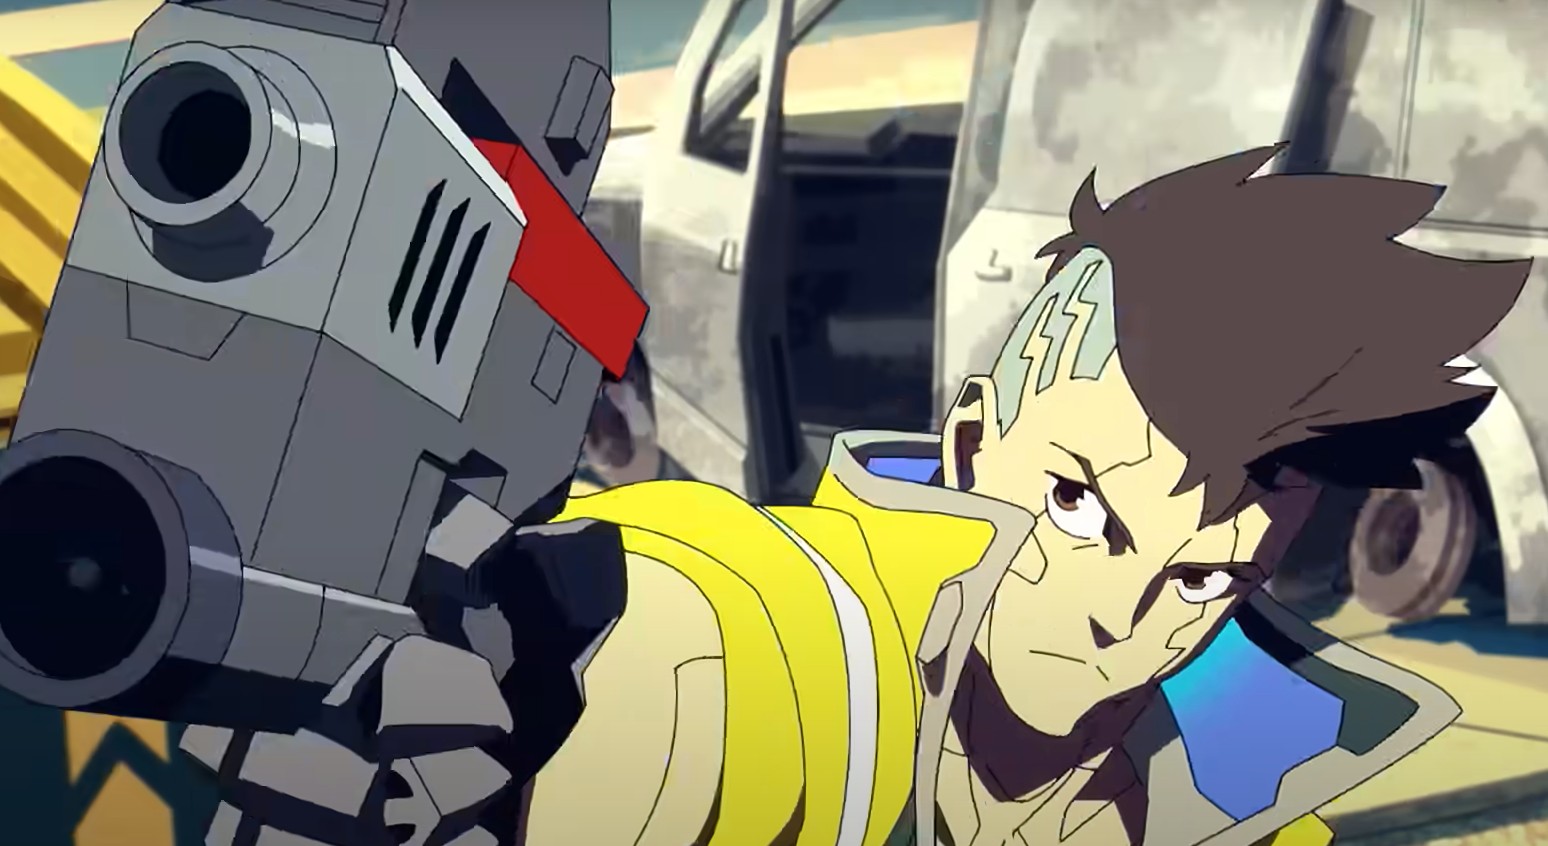 Go cyberpsycho with red band trailer for Cyberpunk Edgerunners anime